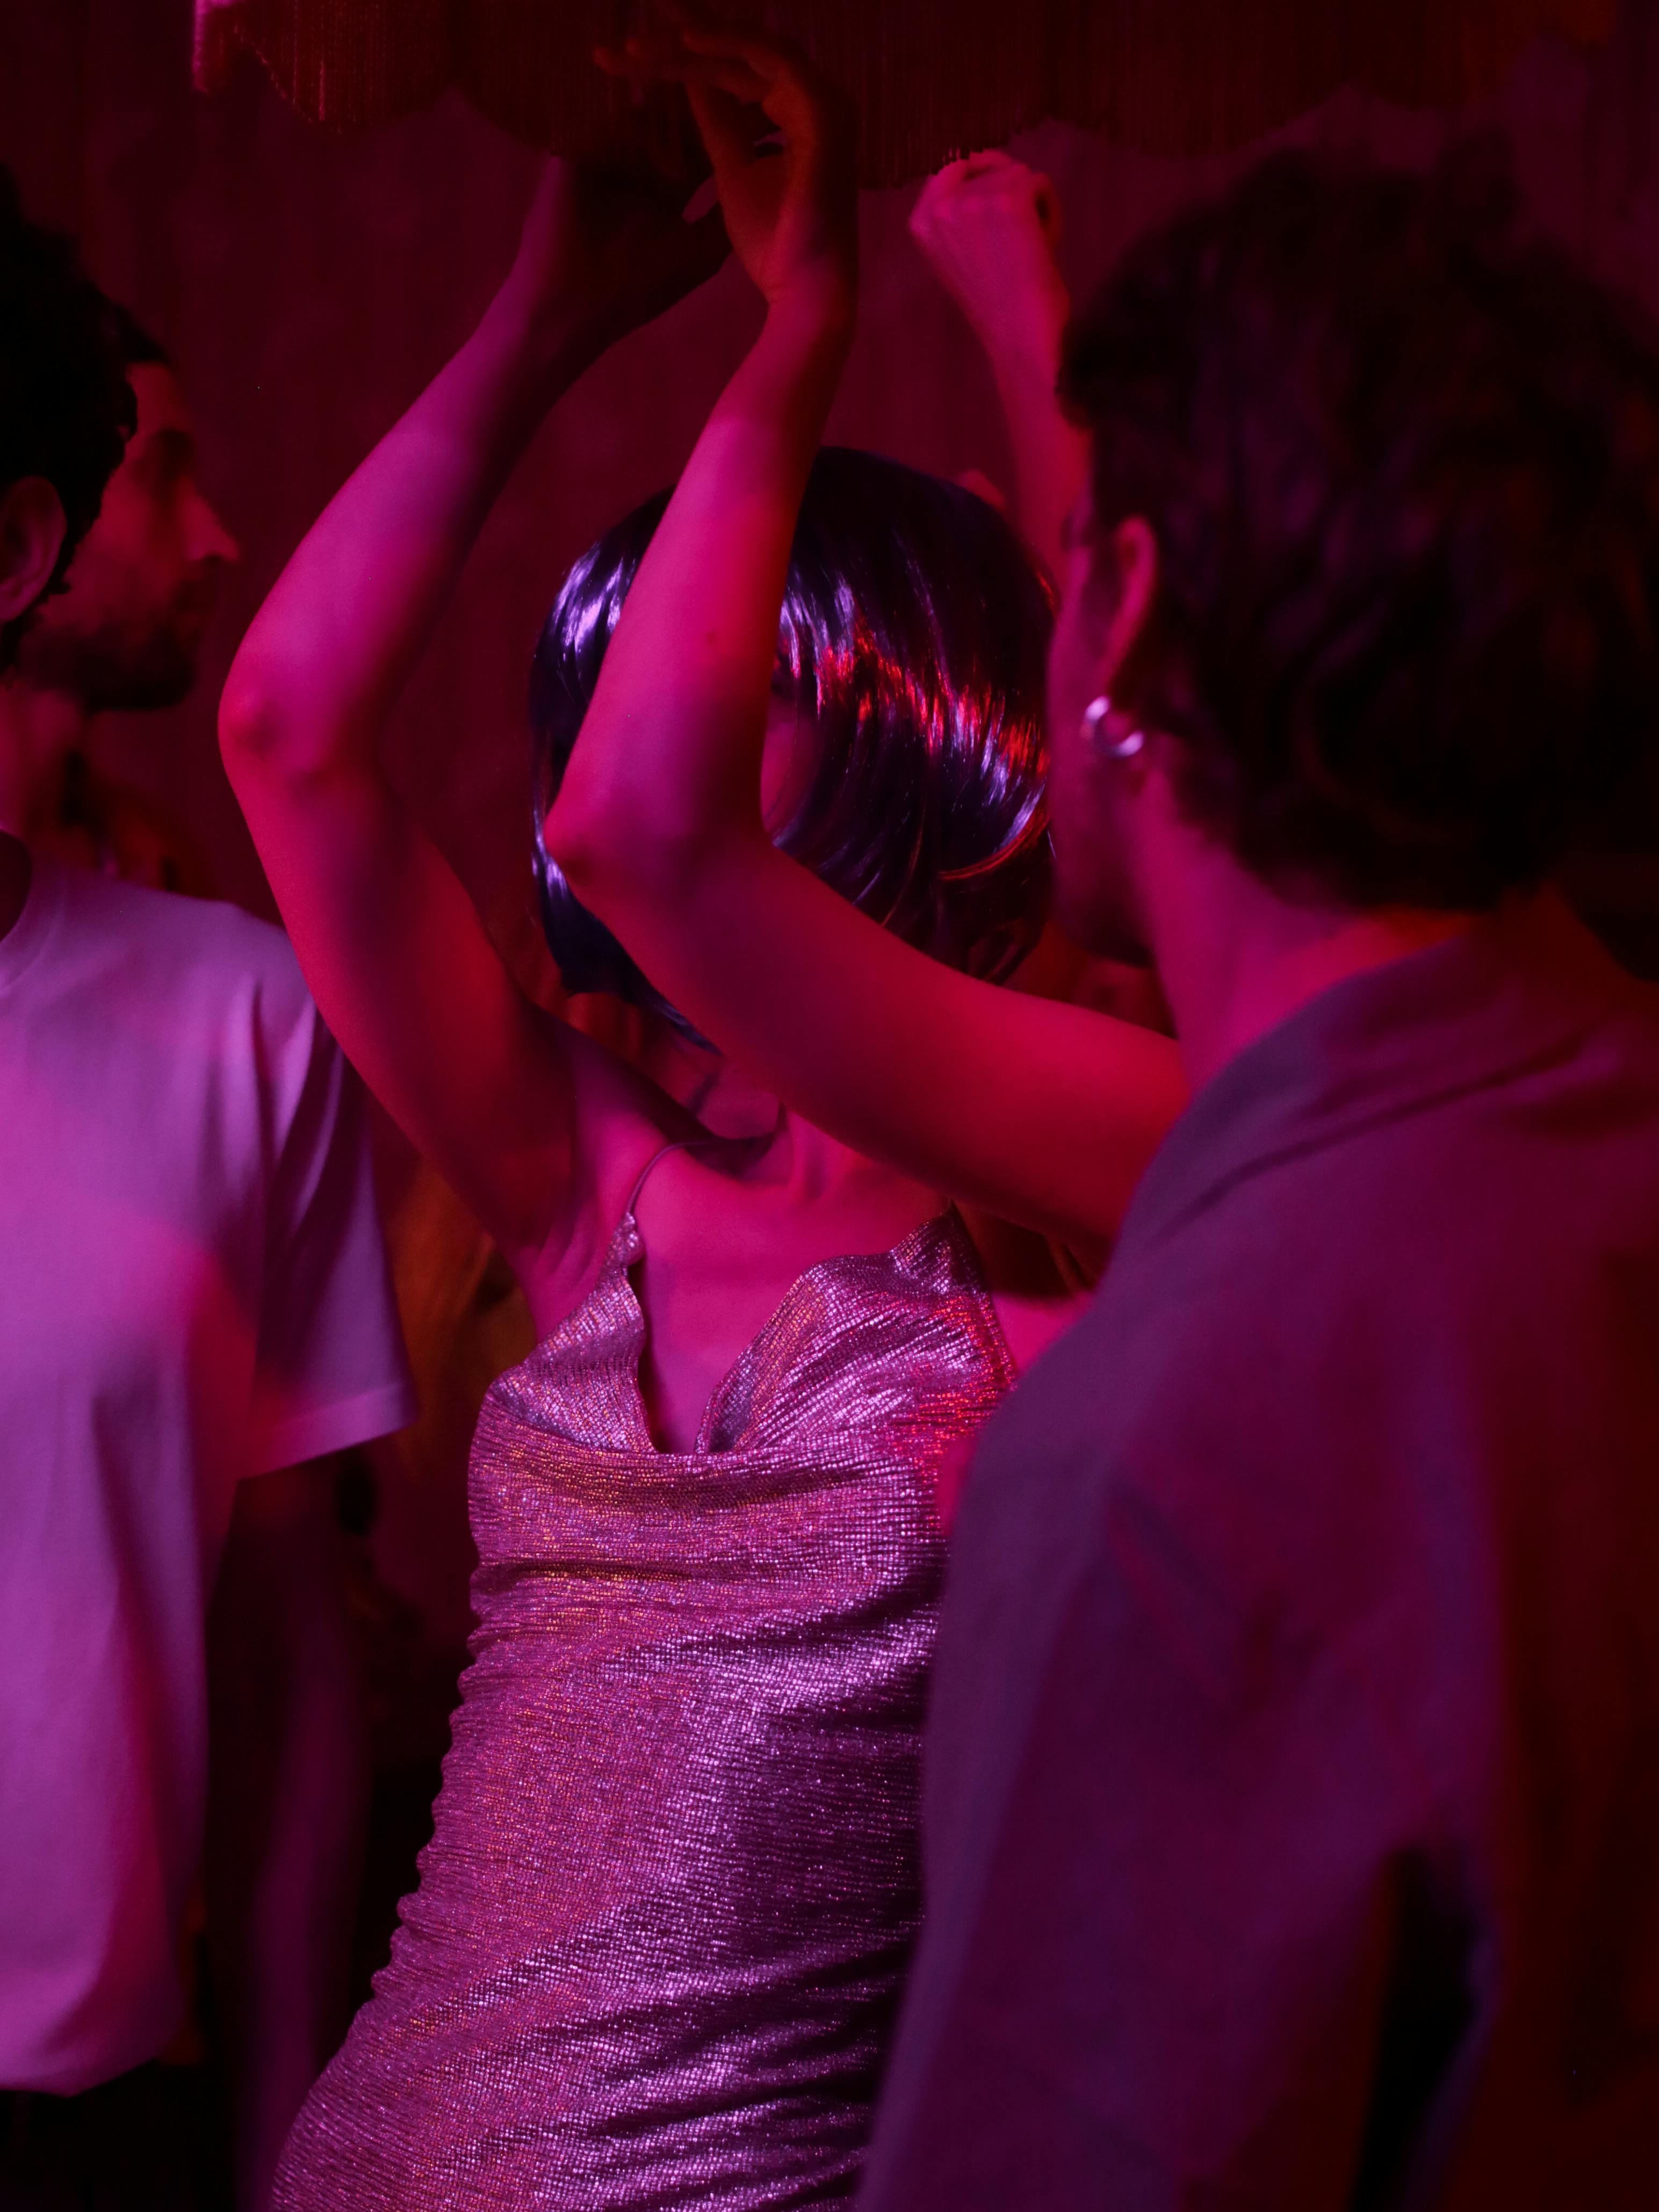 Jane dancing at the party | Source: Pexels